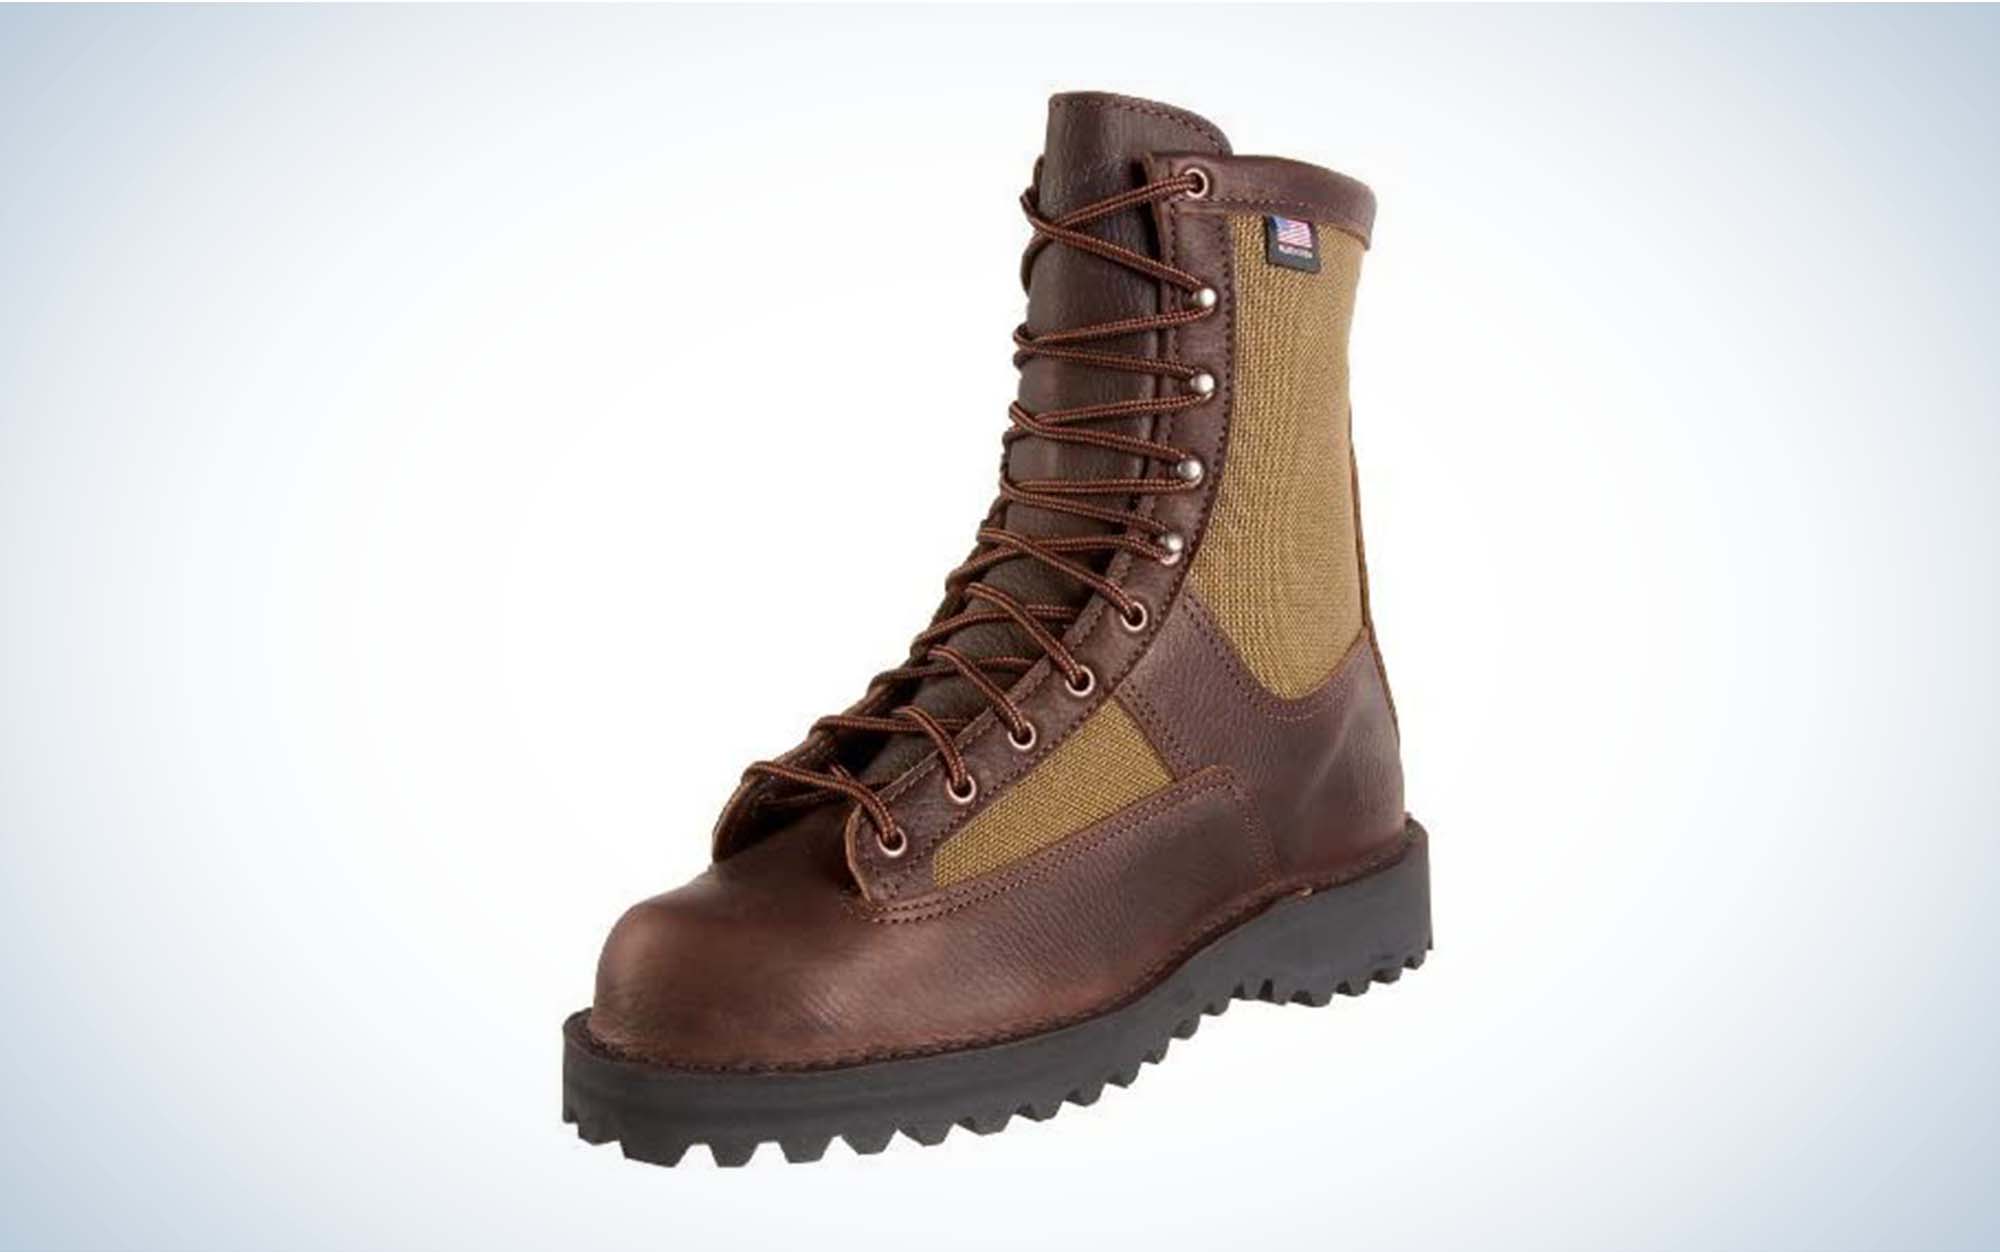 The Danner Grouse is the best multi-purpose upland hunting boot.